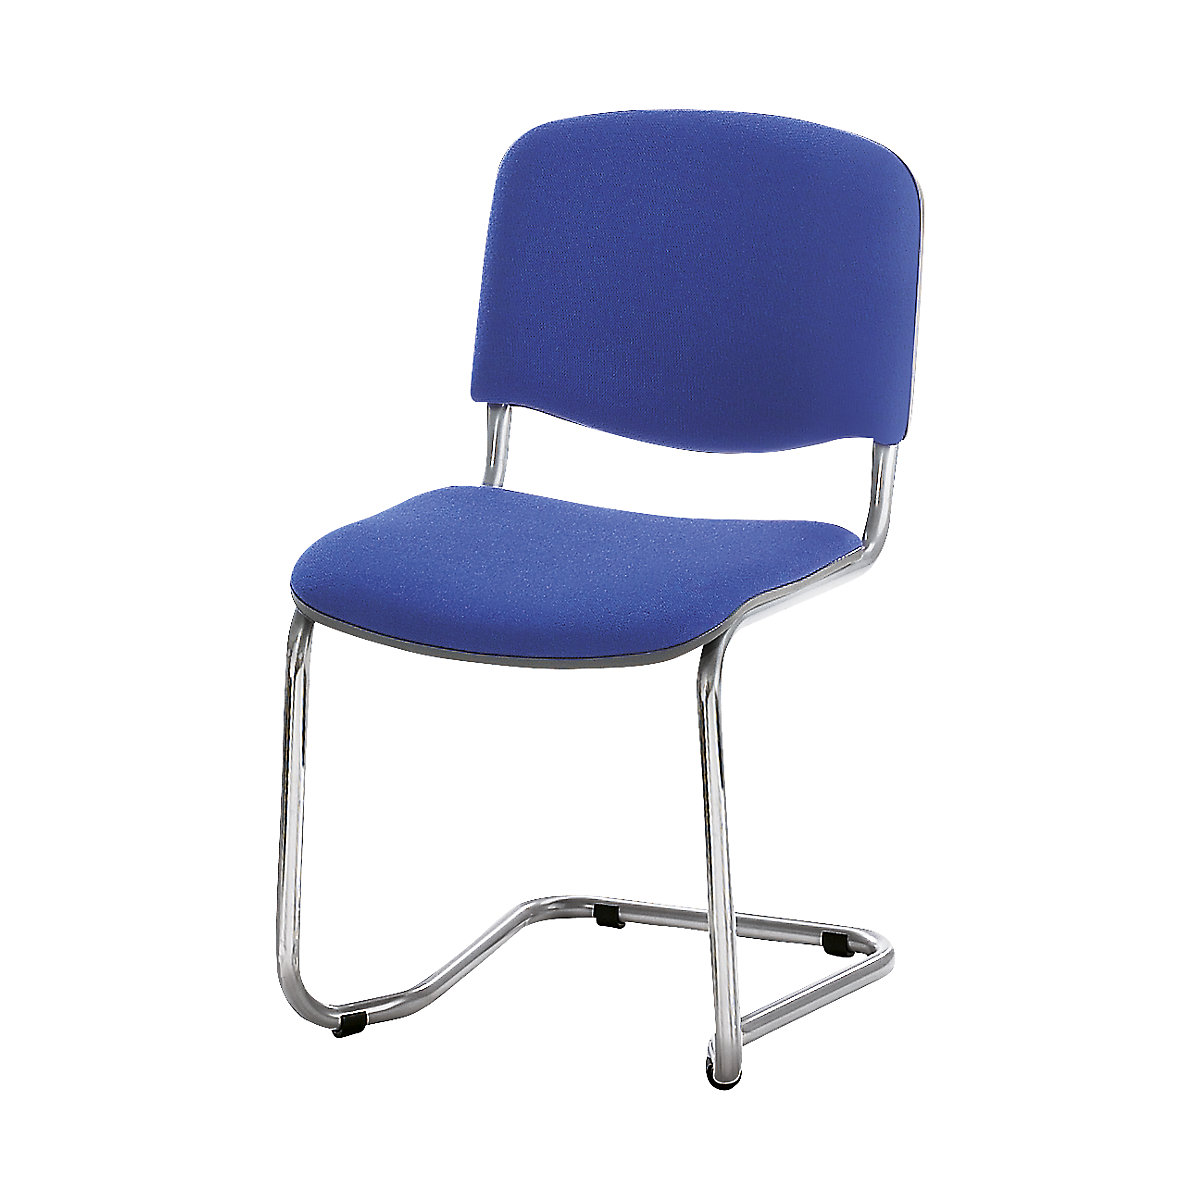 Cantilever chair, stackable